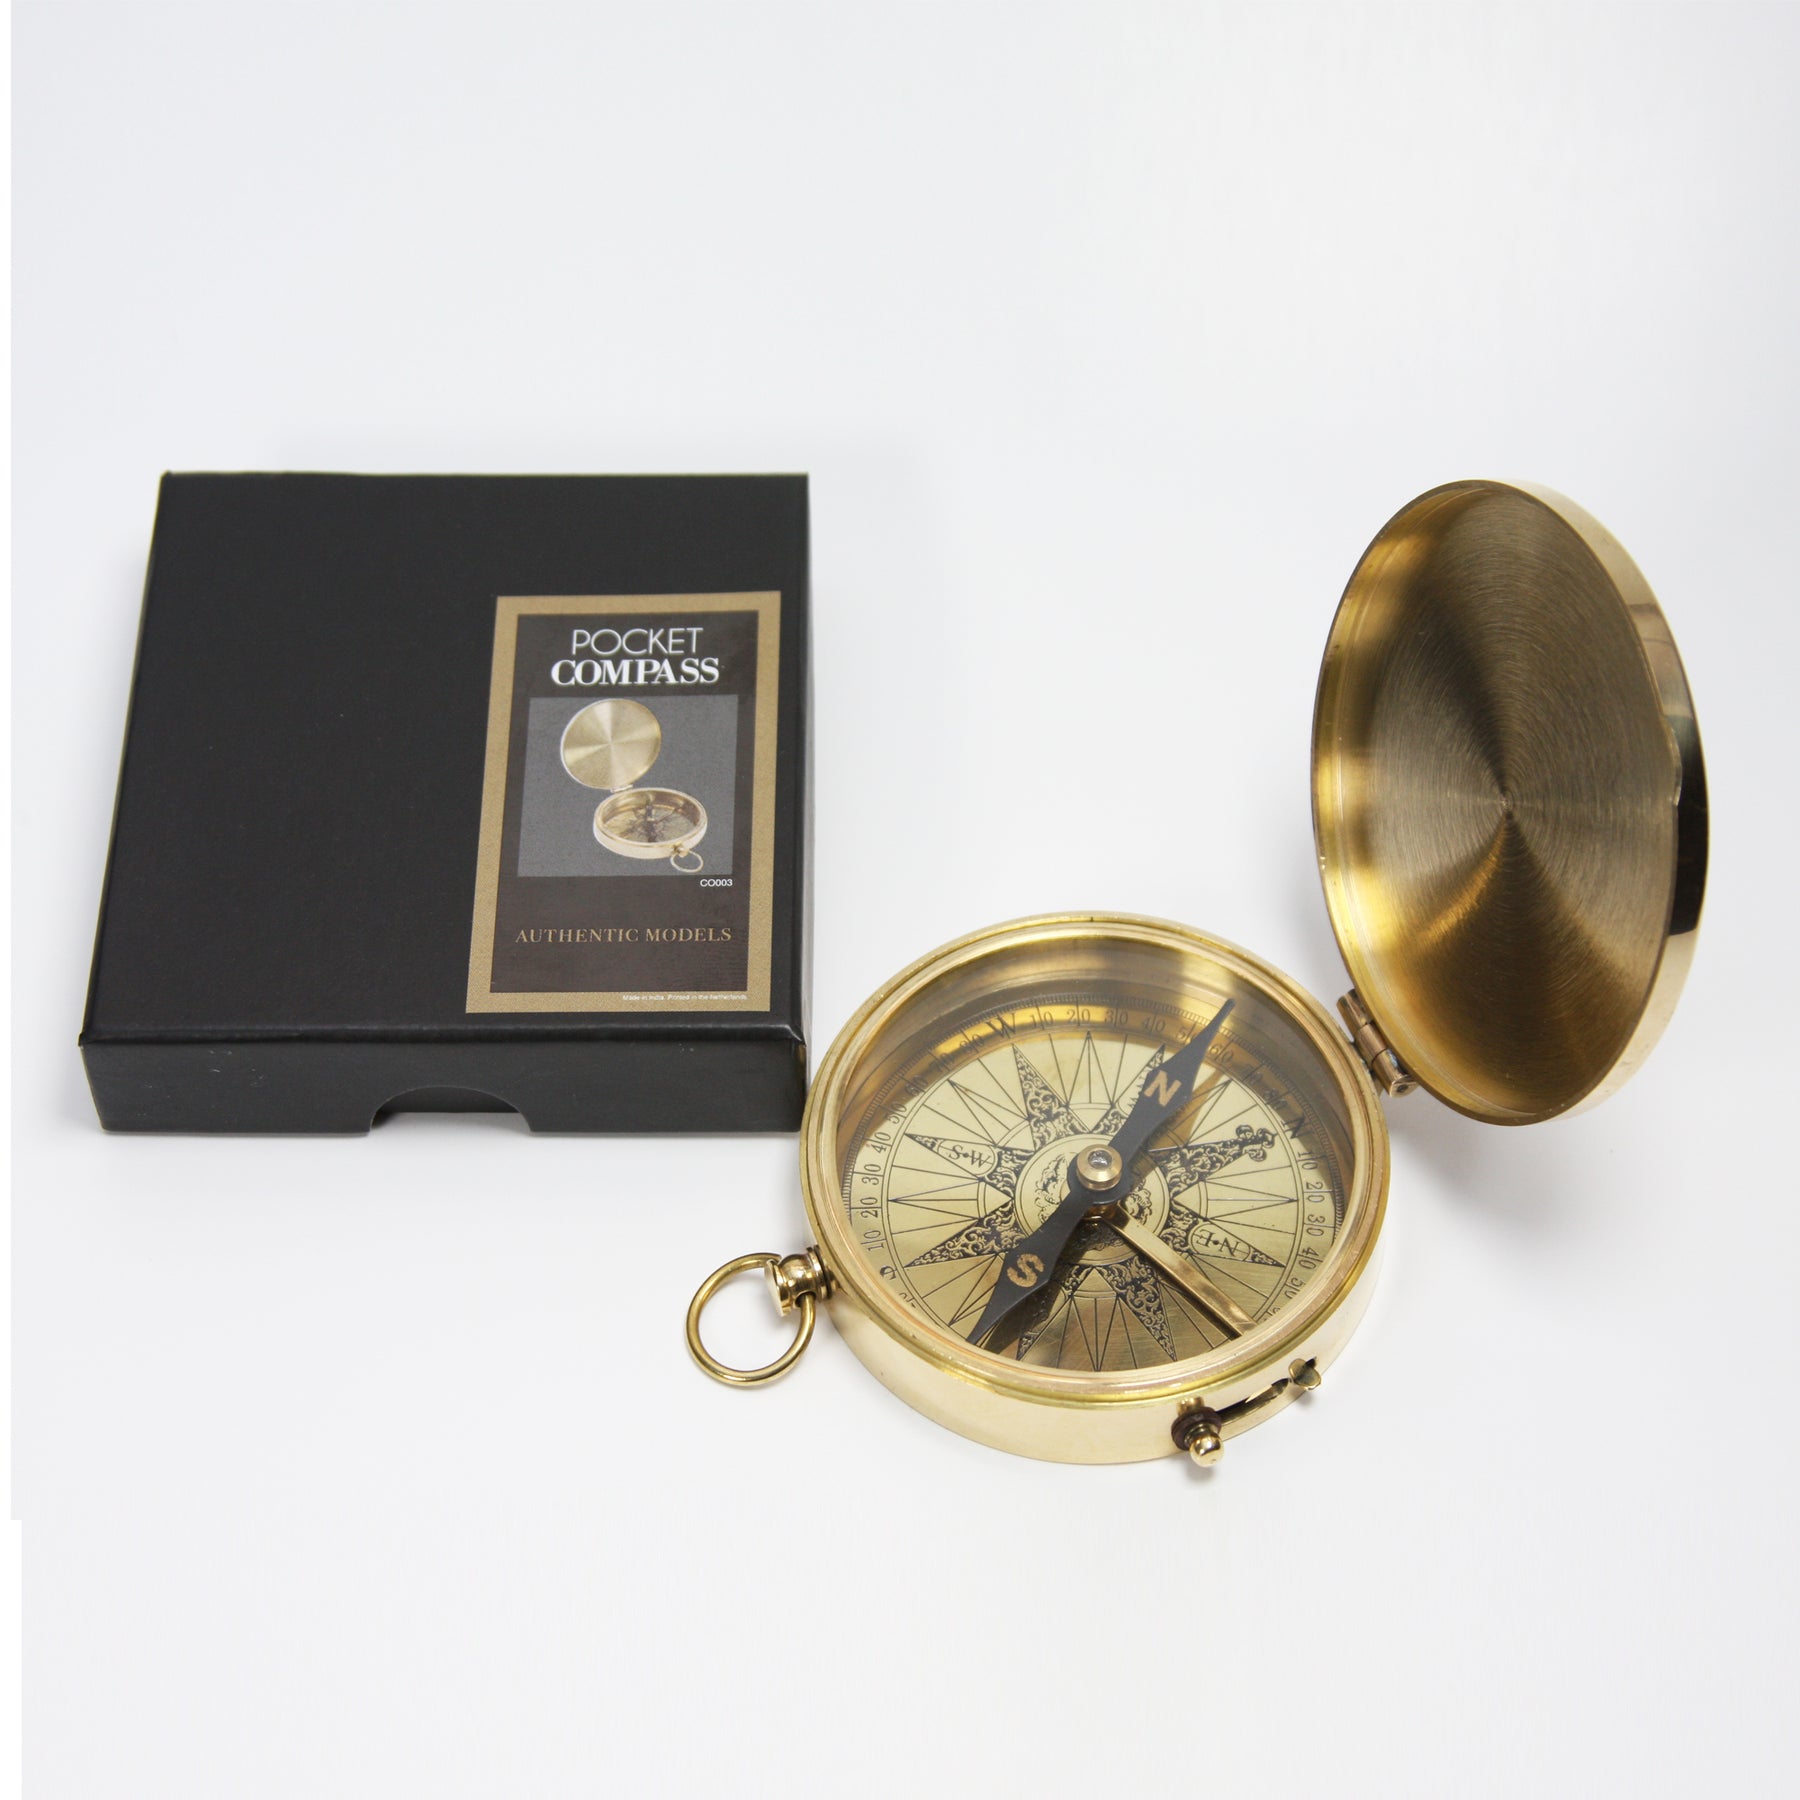 Shoptreed Antique Nautical Brass Pocket Compass Compass - Buy